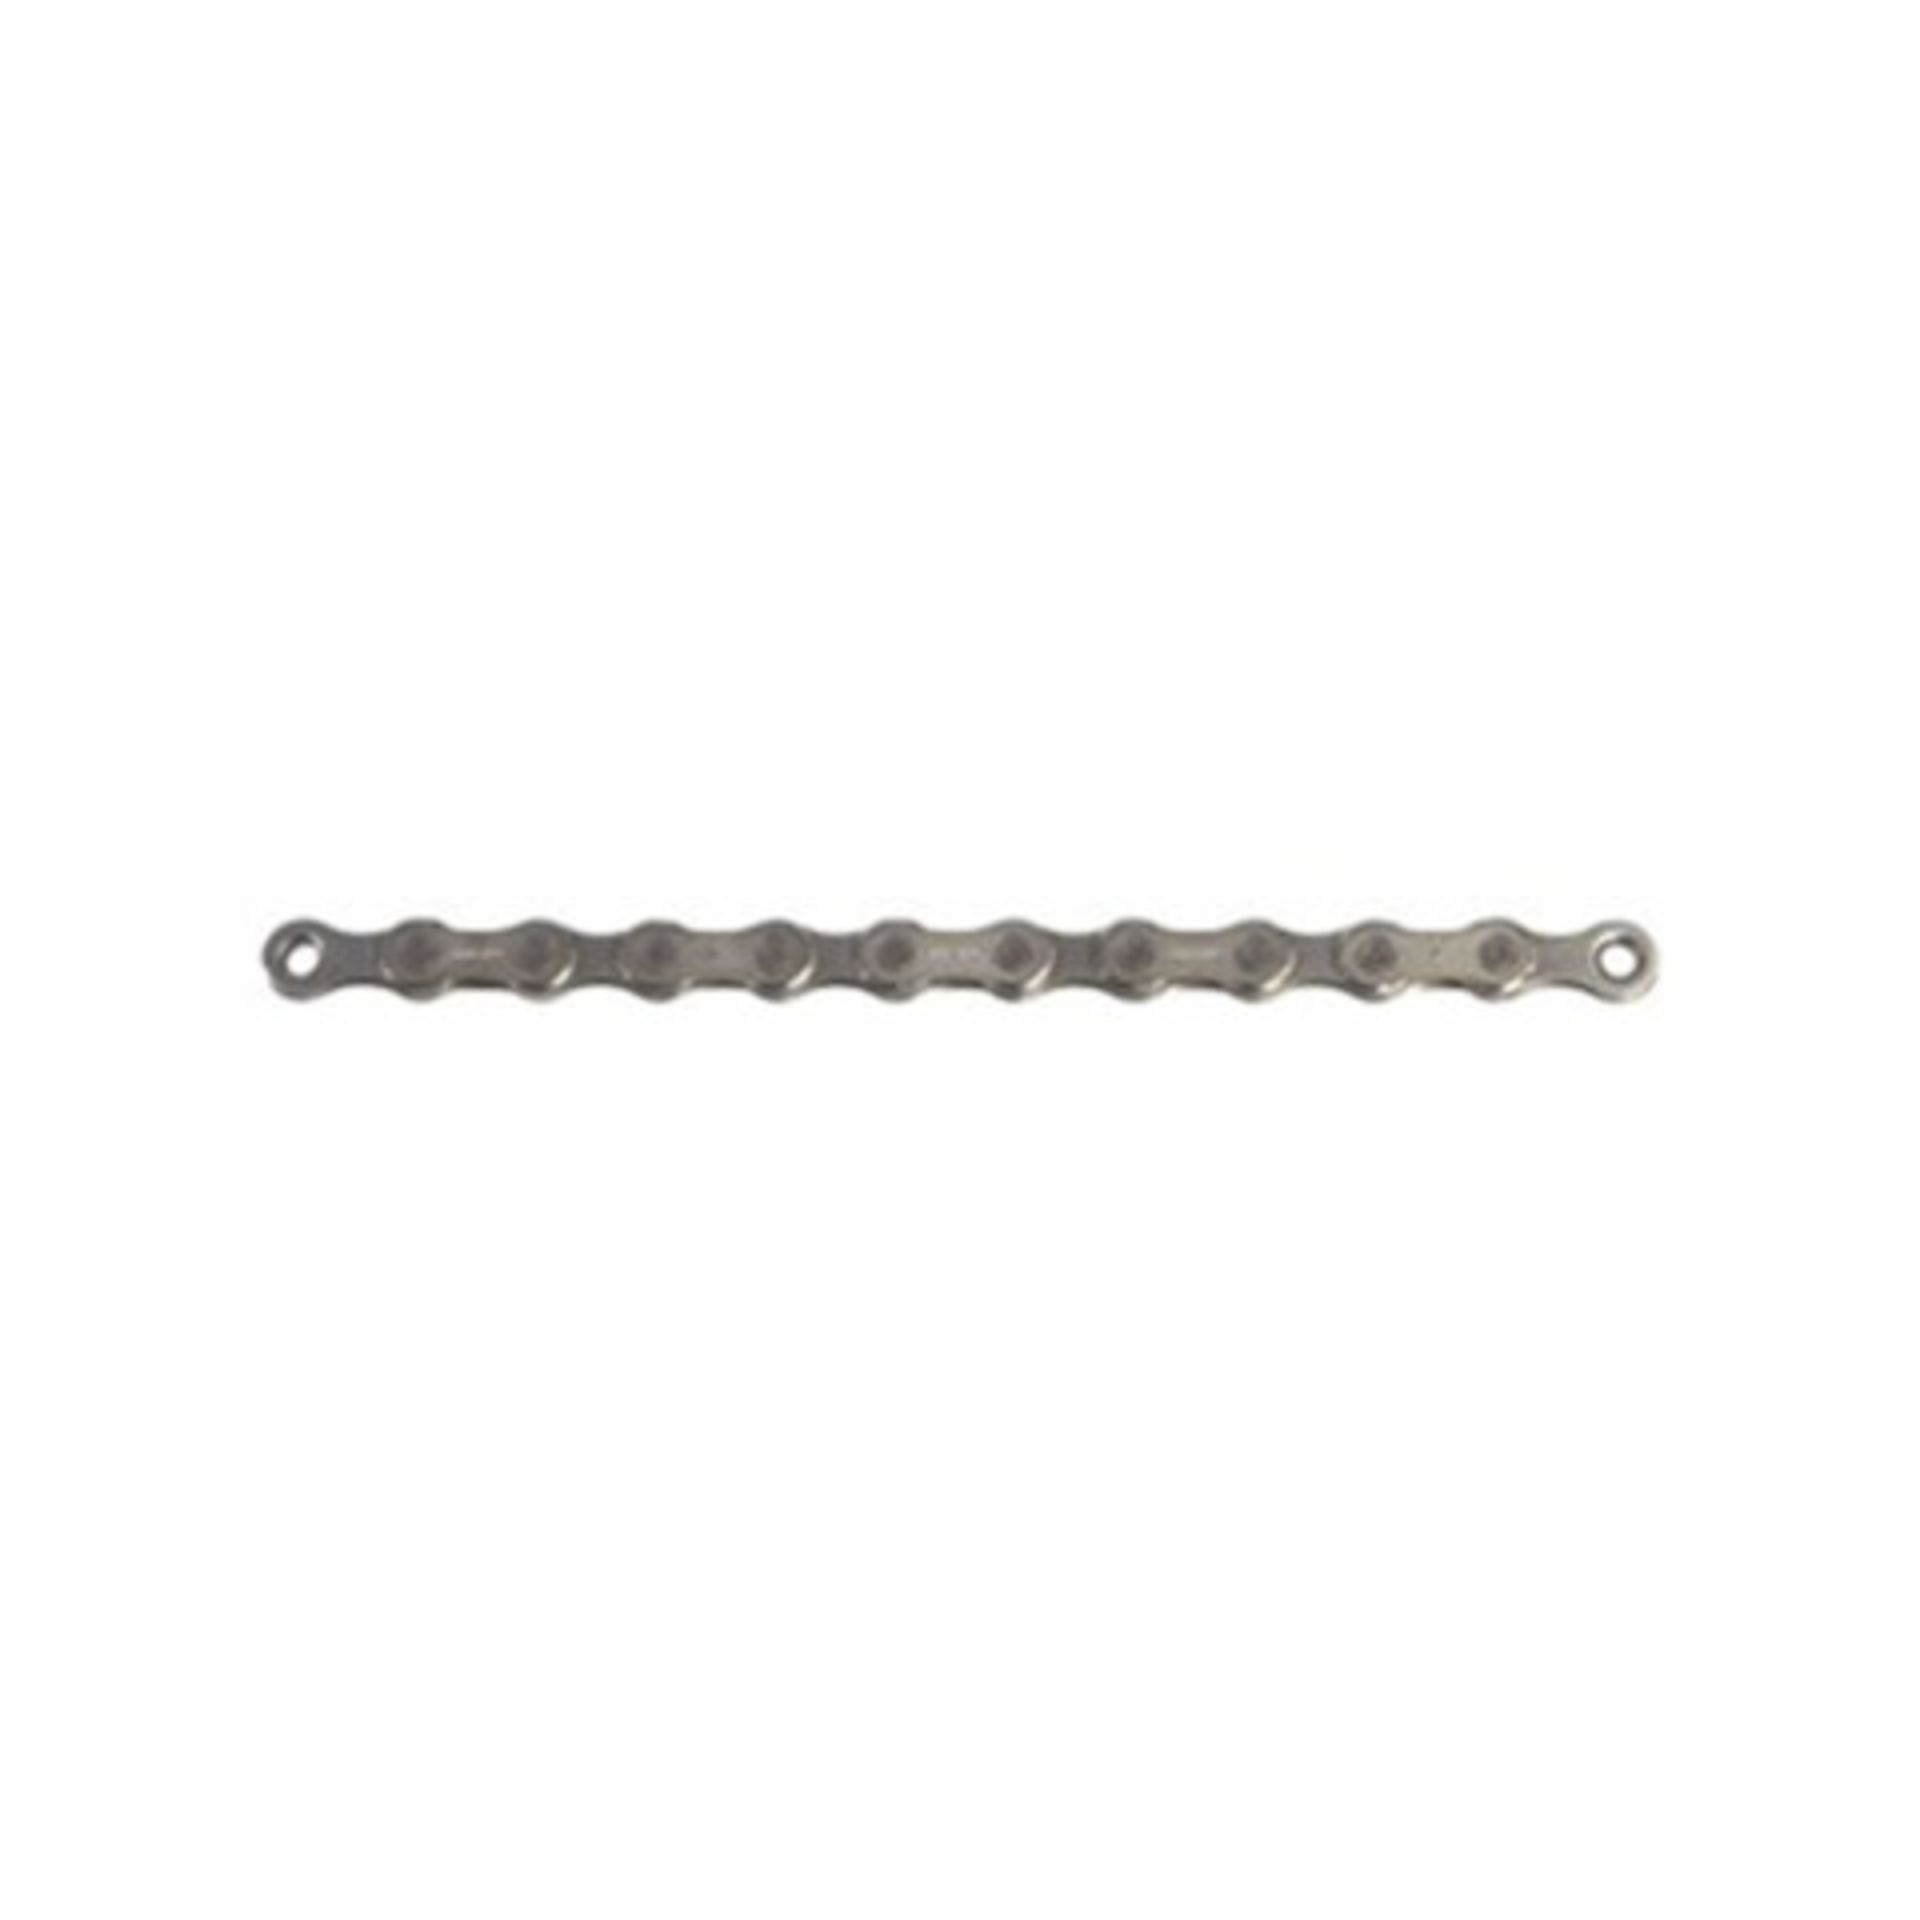 7 x Sram PC1031 10 Speed Chains - 114 Links - Image 2 of 6